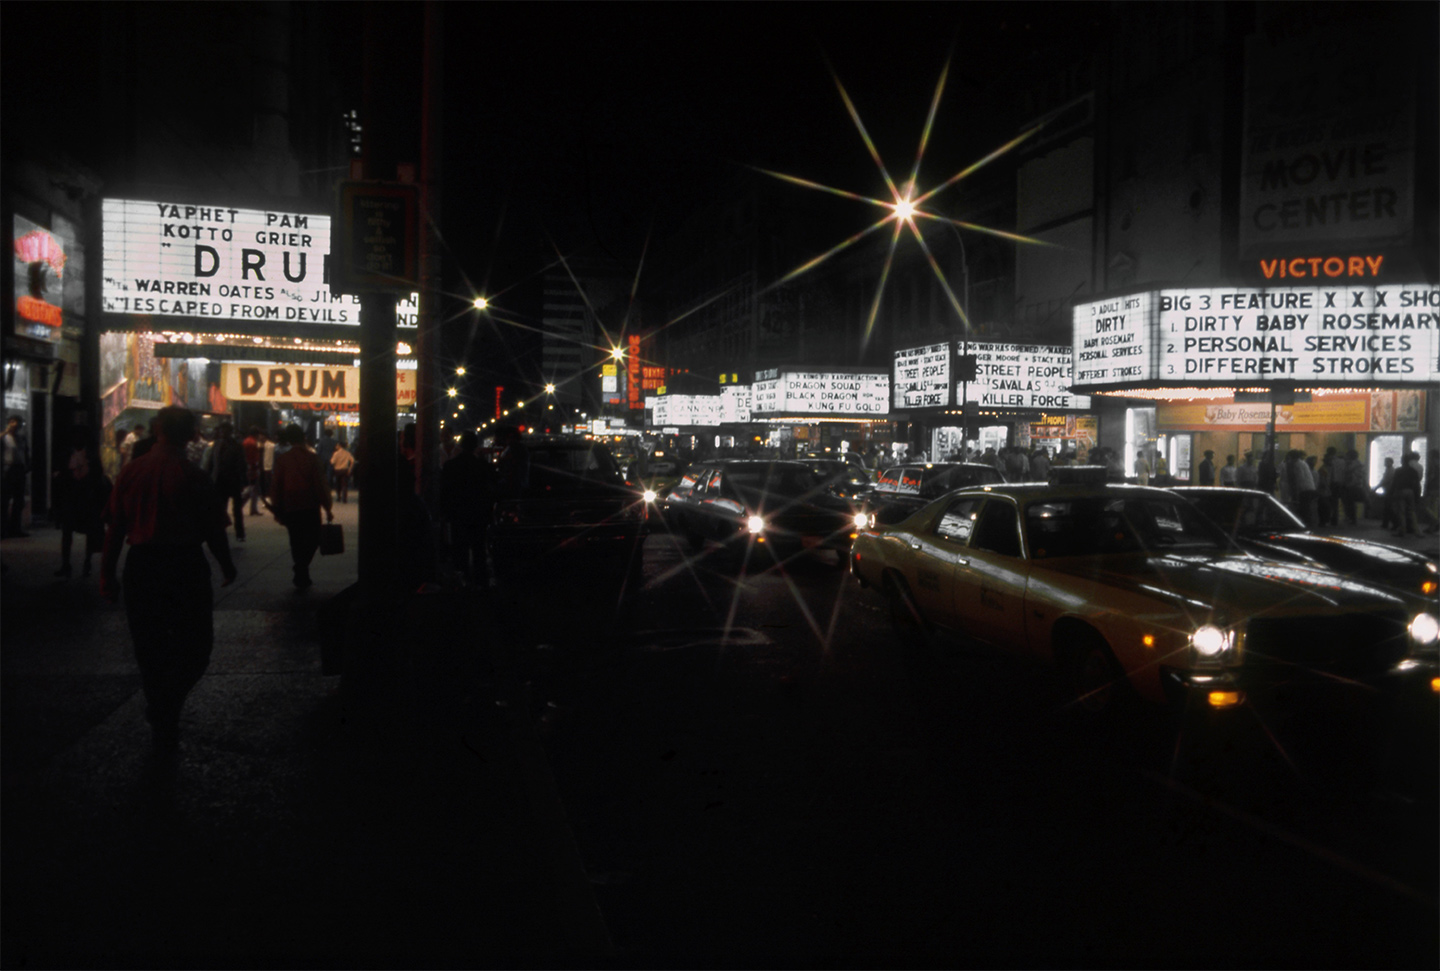 Times Square in the 70s